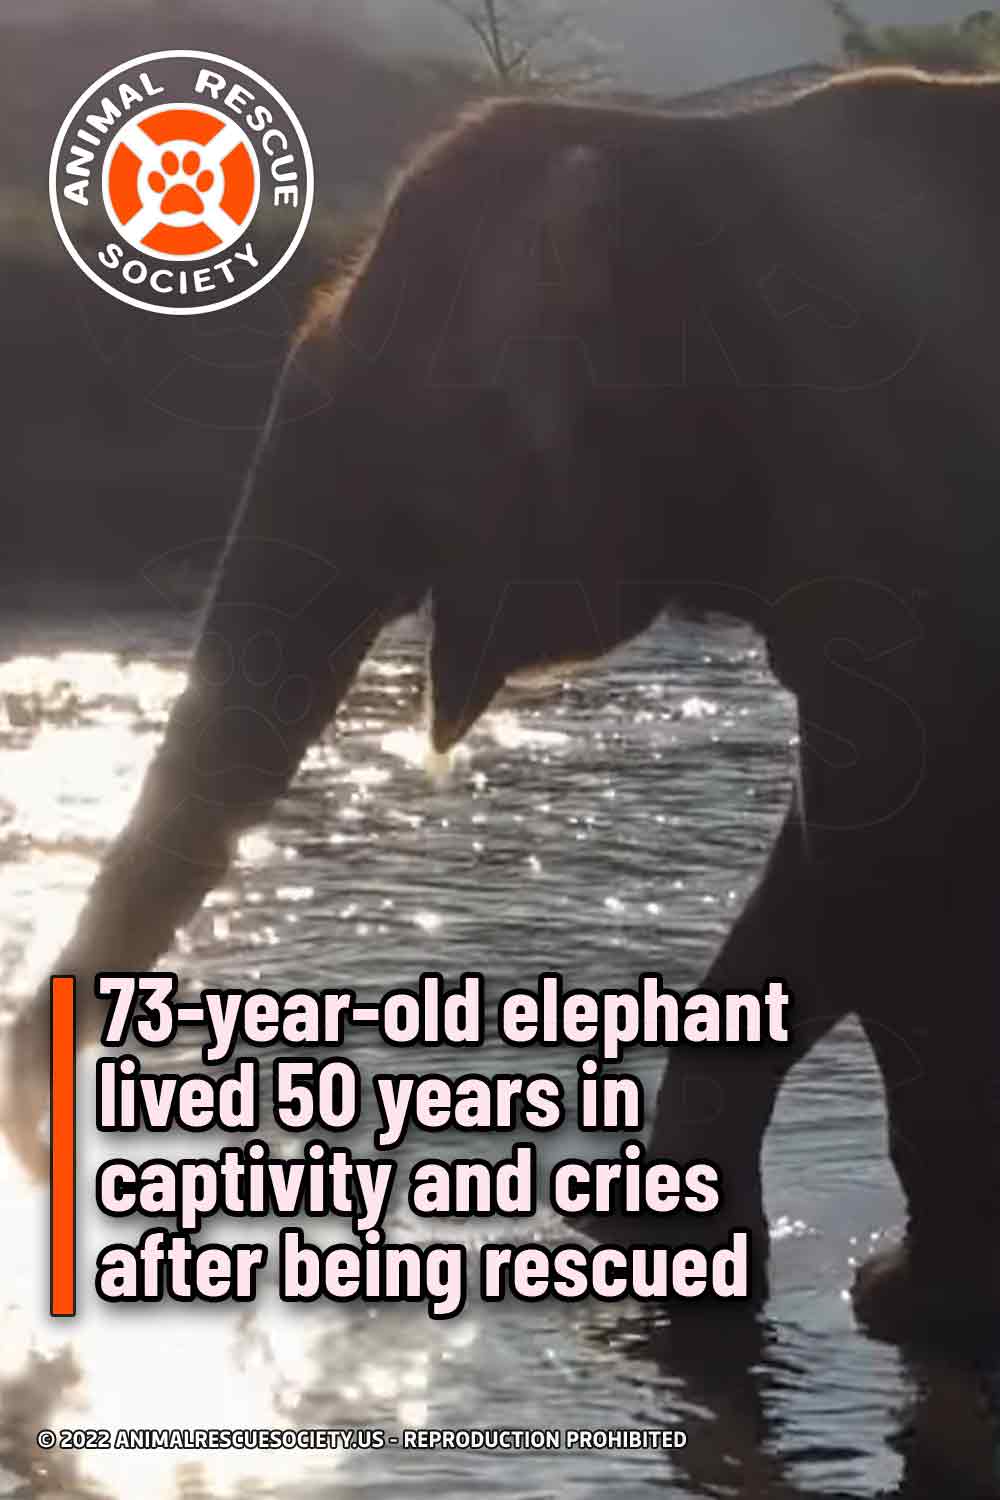 73-year-old elephant lived 50 years in captivity and cries after being rescued